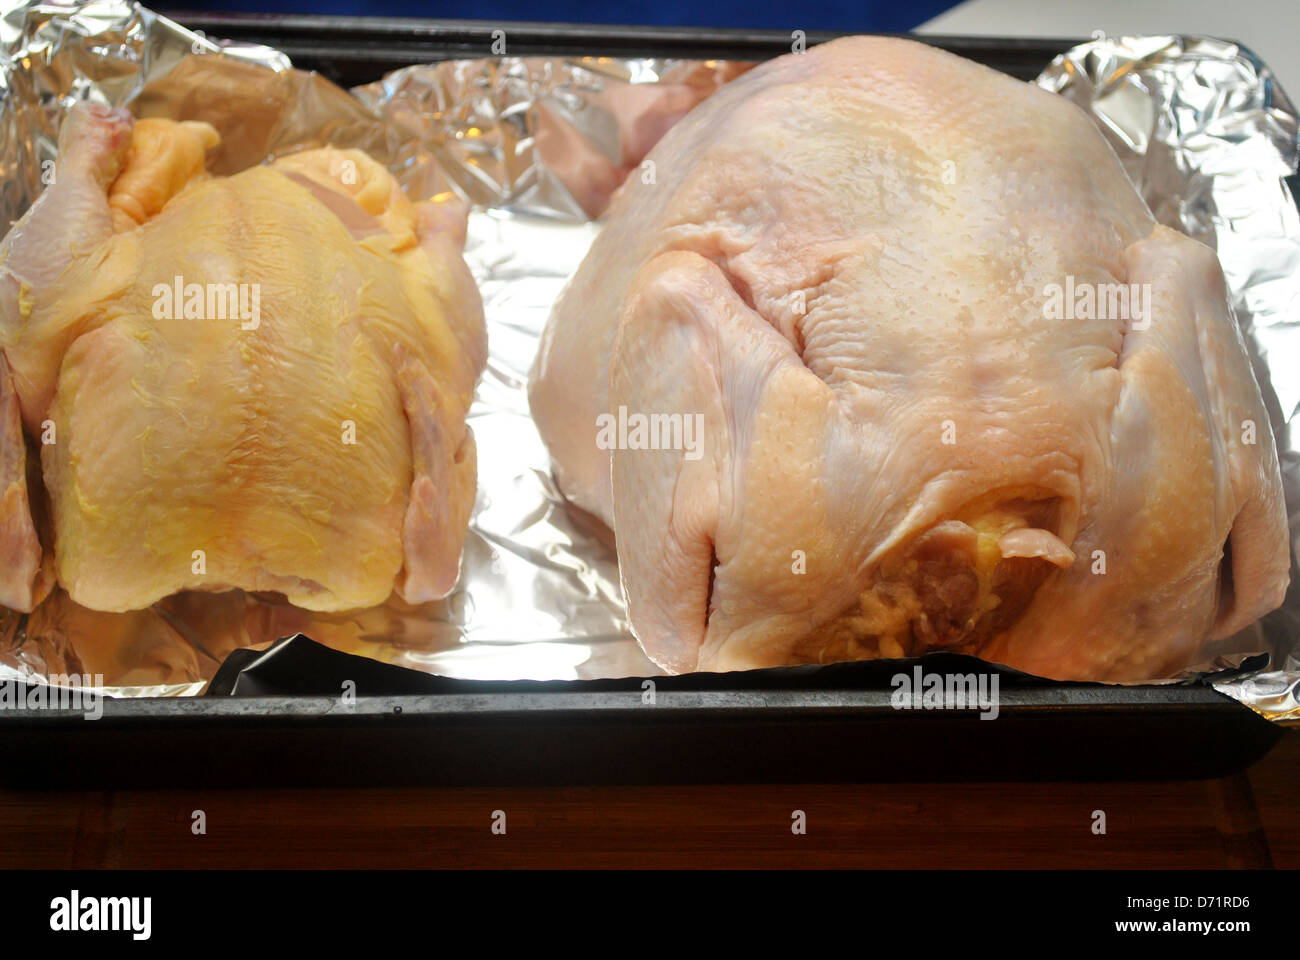 Raw Hen and Raw Chicken in a Baking Pan Stock Photo